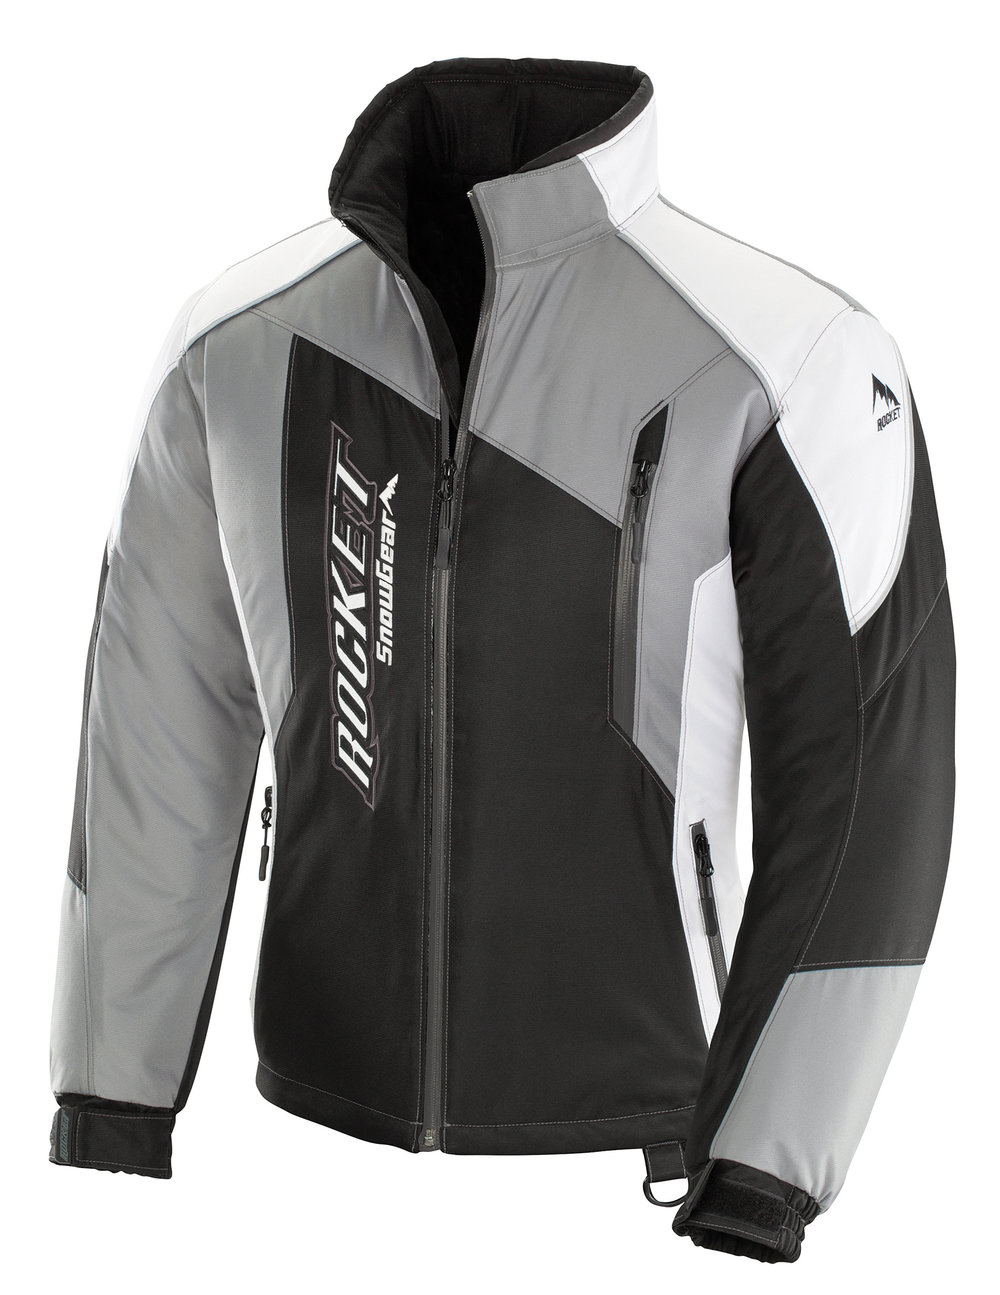 Viewing Images For Joe Rocket Storm XC Jacket for Women ...